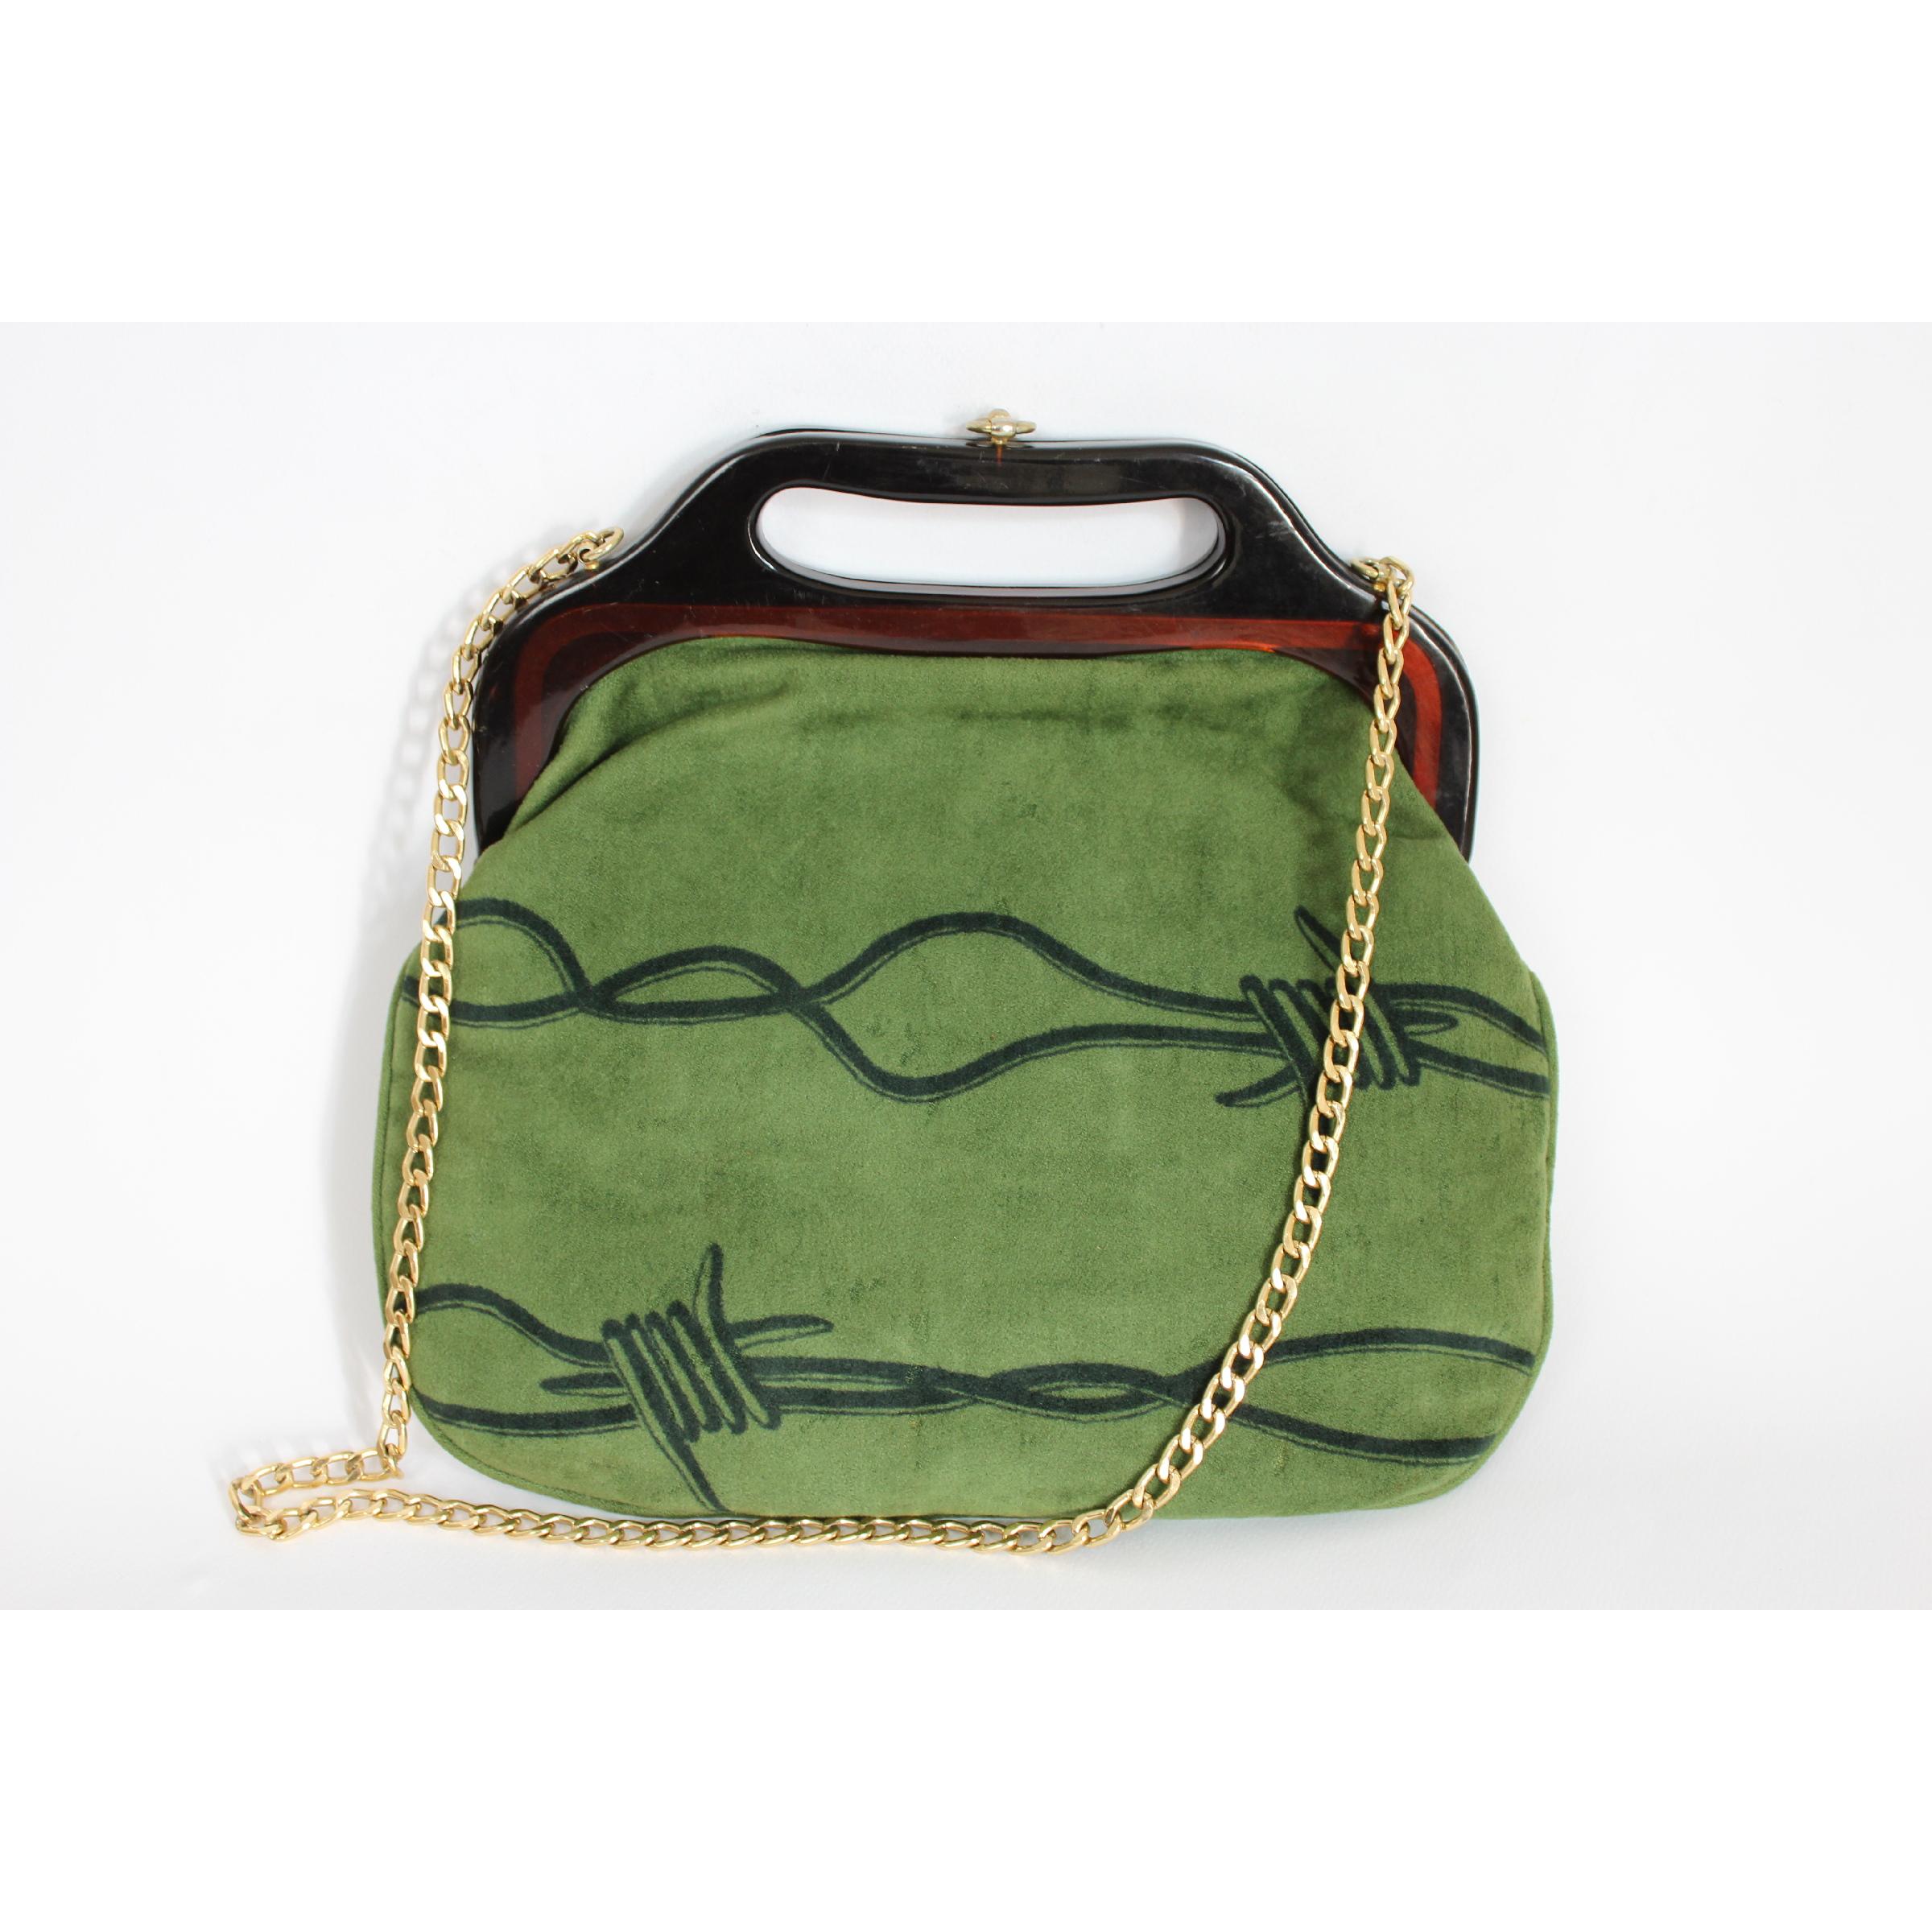 Lanvin Paris vintage bag 70s green, in velvet with bakelite handle, shoulder strap with gold chain, golden clip closure. There is depicted the barbed wire. Good conditions some small sign of use over time.

Width: 33 cm
Height: 30 cm
Depth: 3 cm